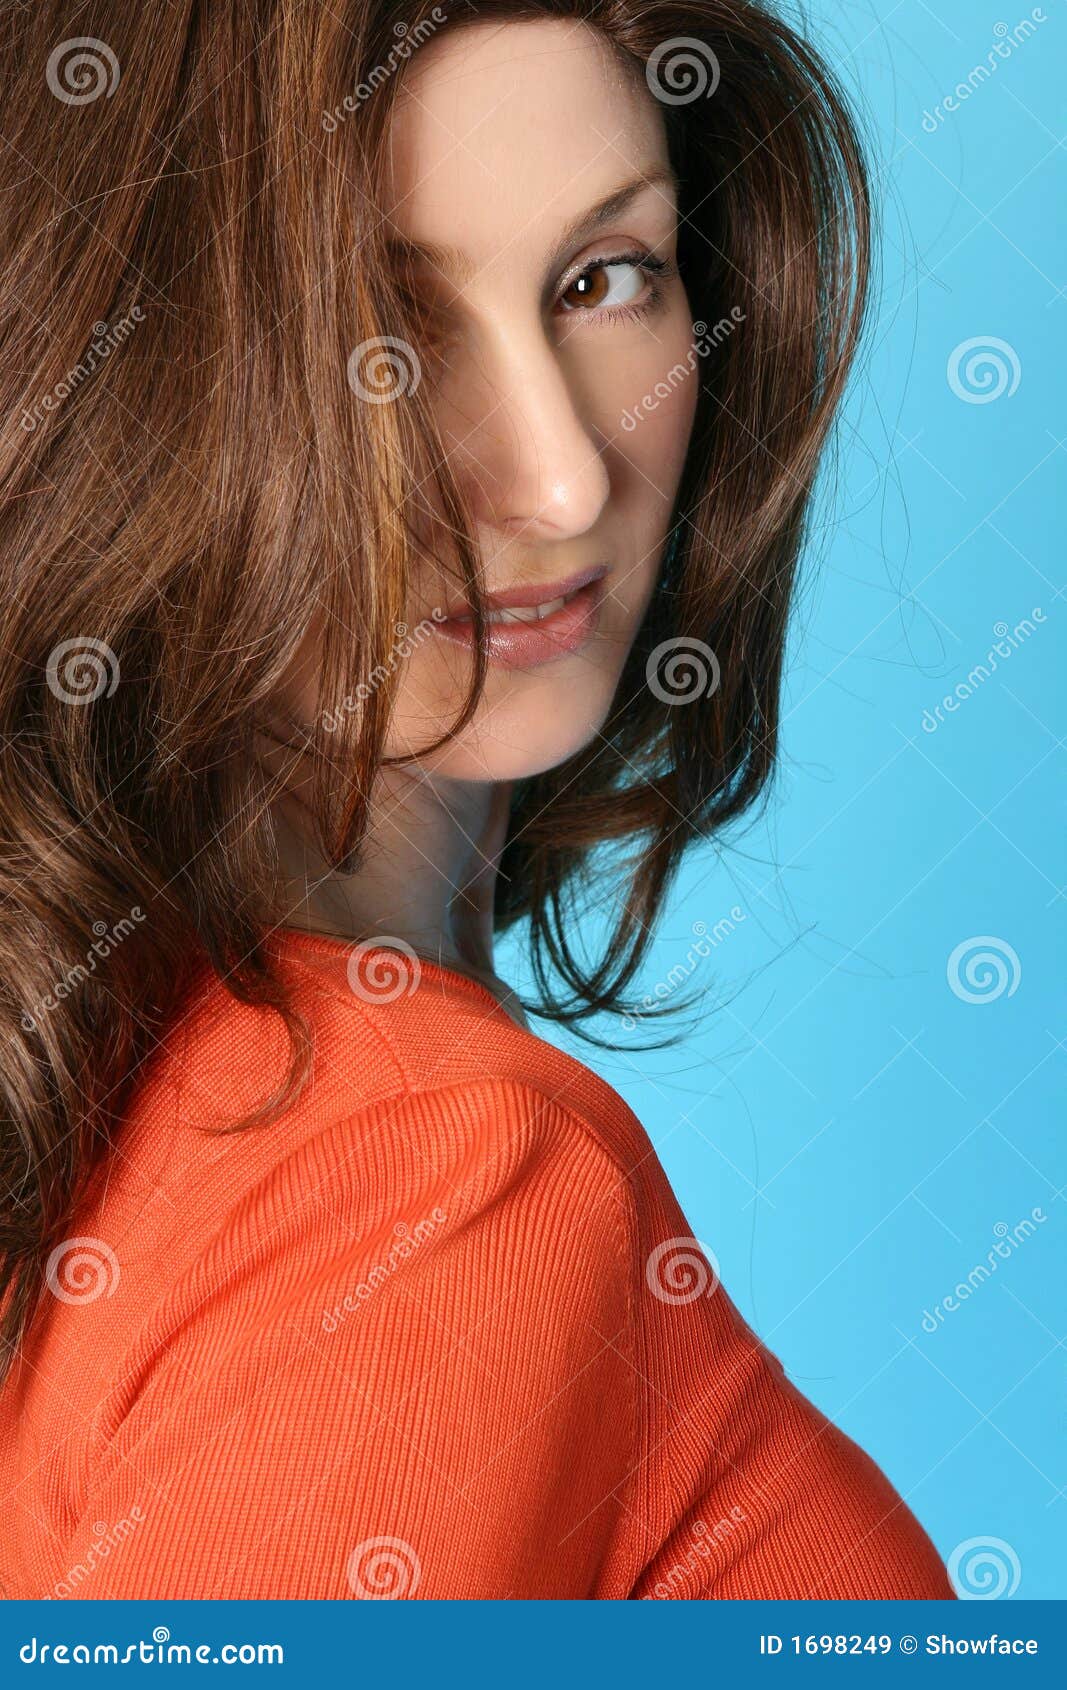 female with brown hair with auburn highlights